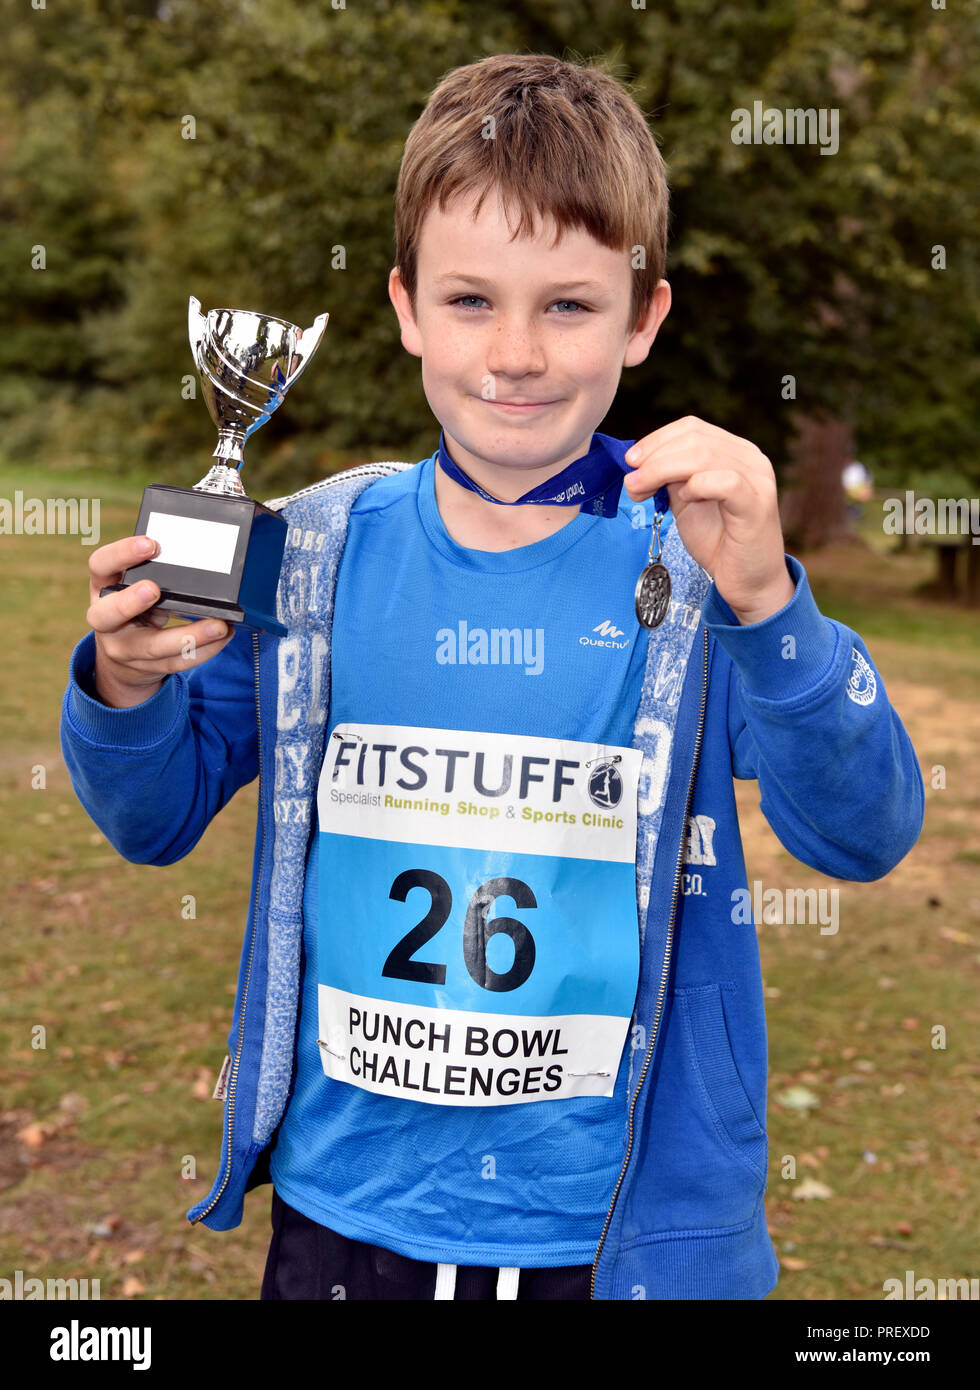 8 year old boy proudly displaying his medal and cup after winning a 1KM cross country running race, Hindhead, Surrey, UK. Sunday 30 September 2018. Stock Photo